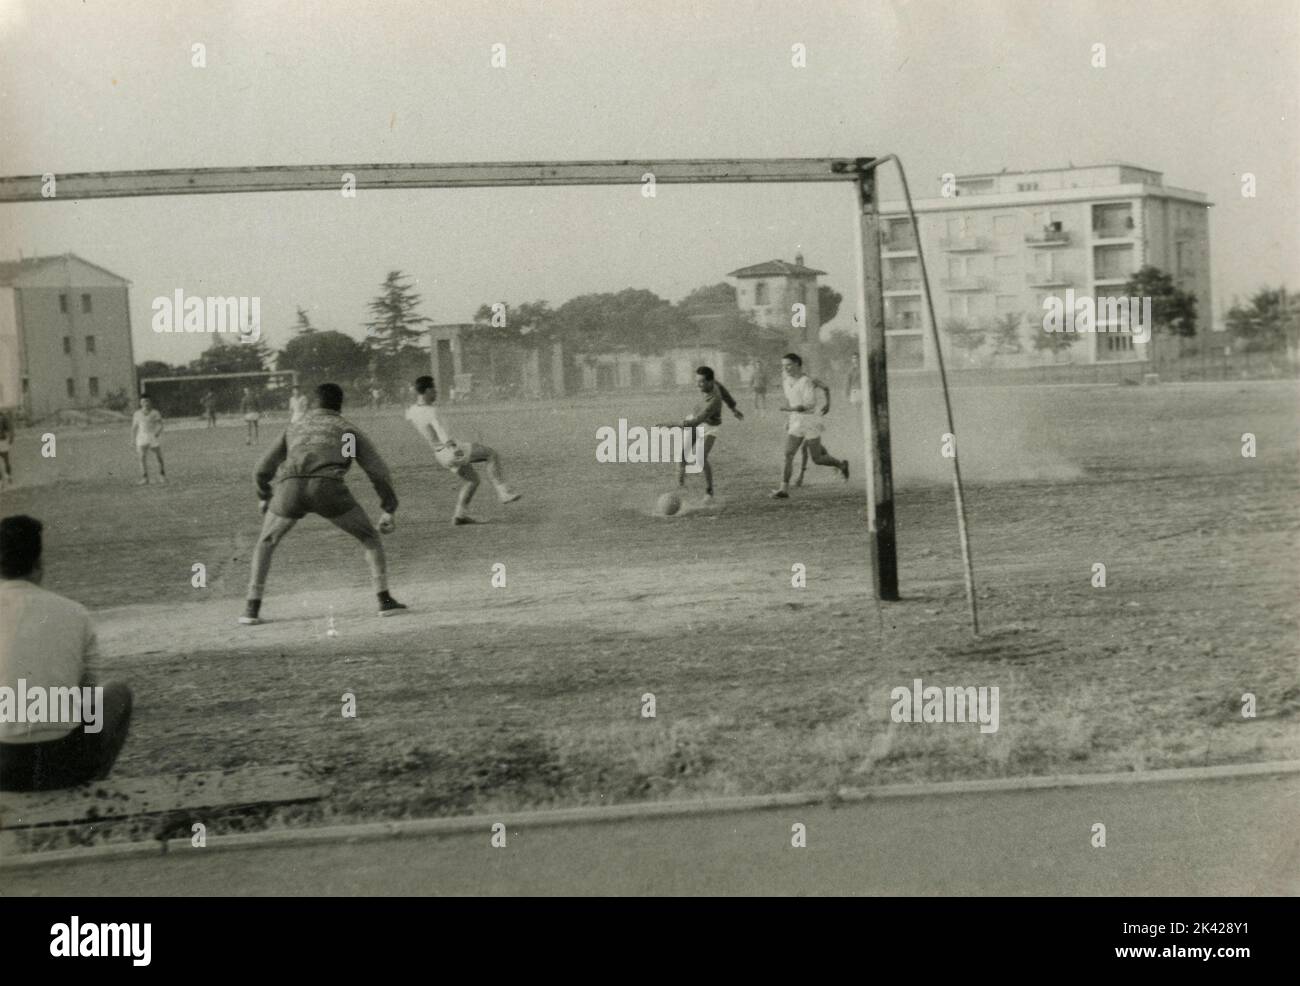 Amateurial football match in a dusty field, Italy 1950s Stock Photo